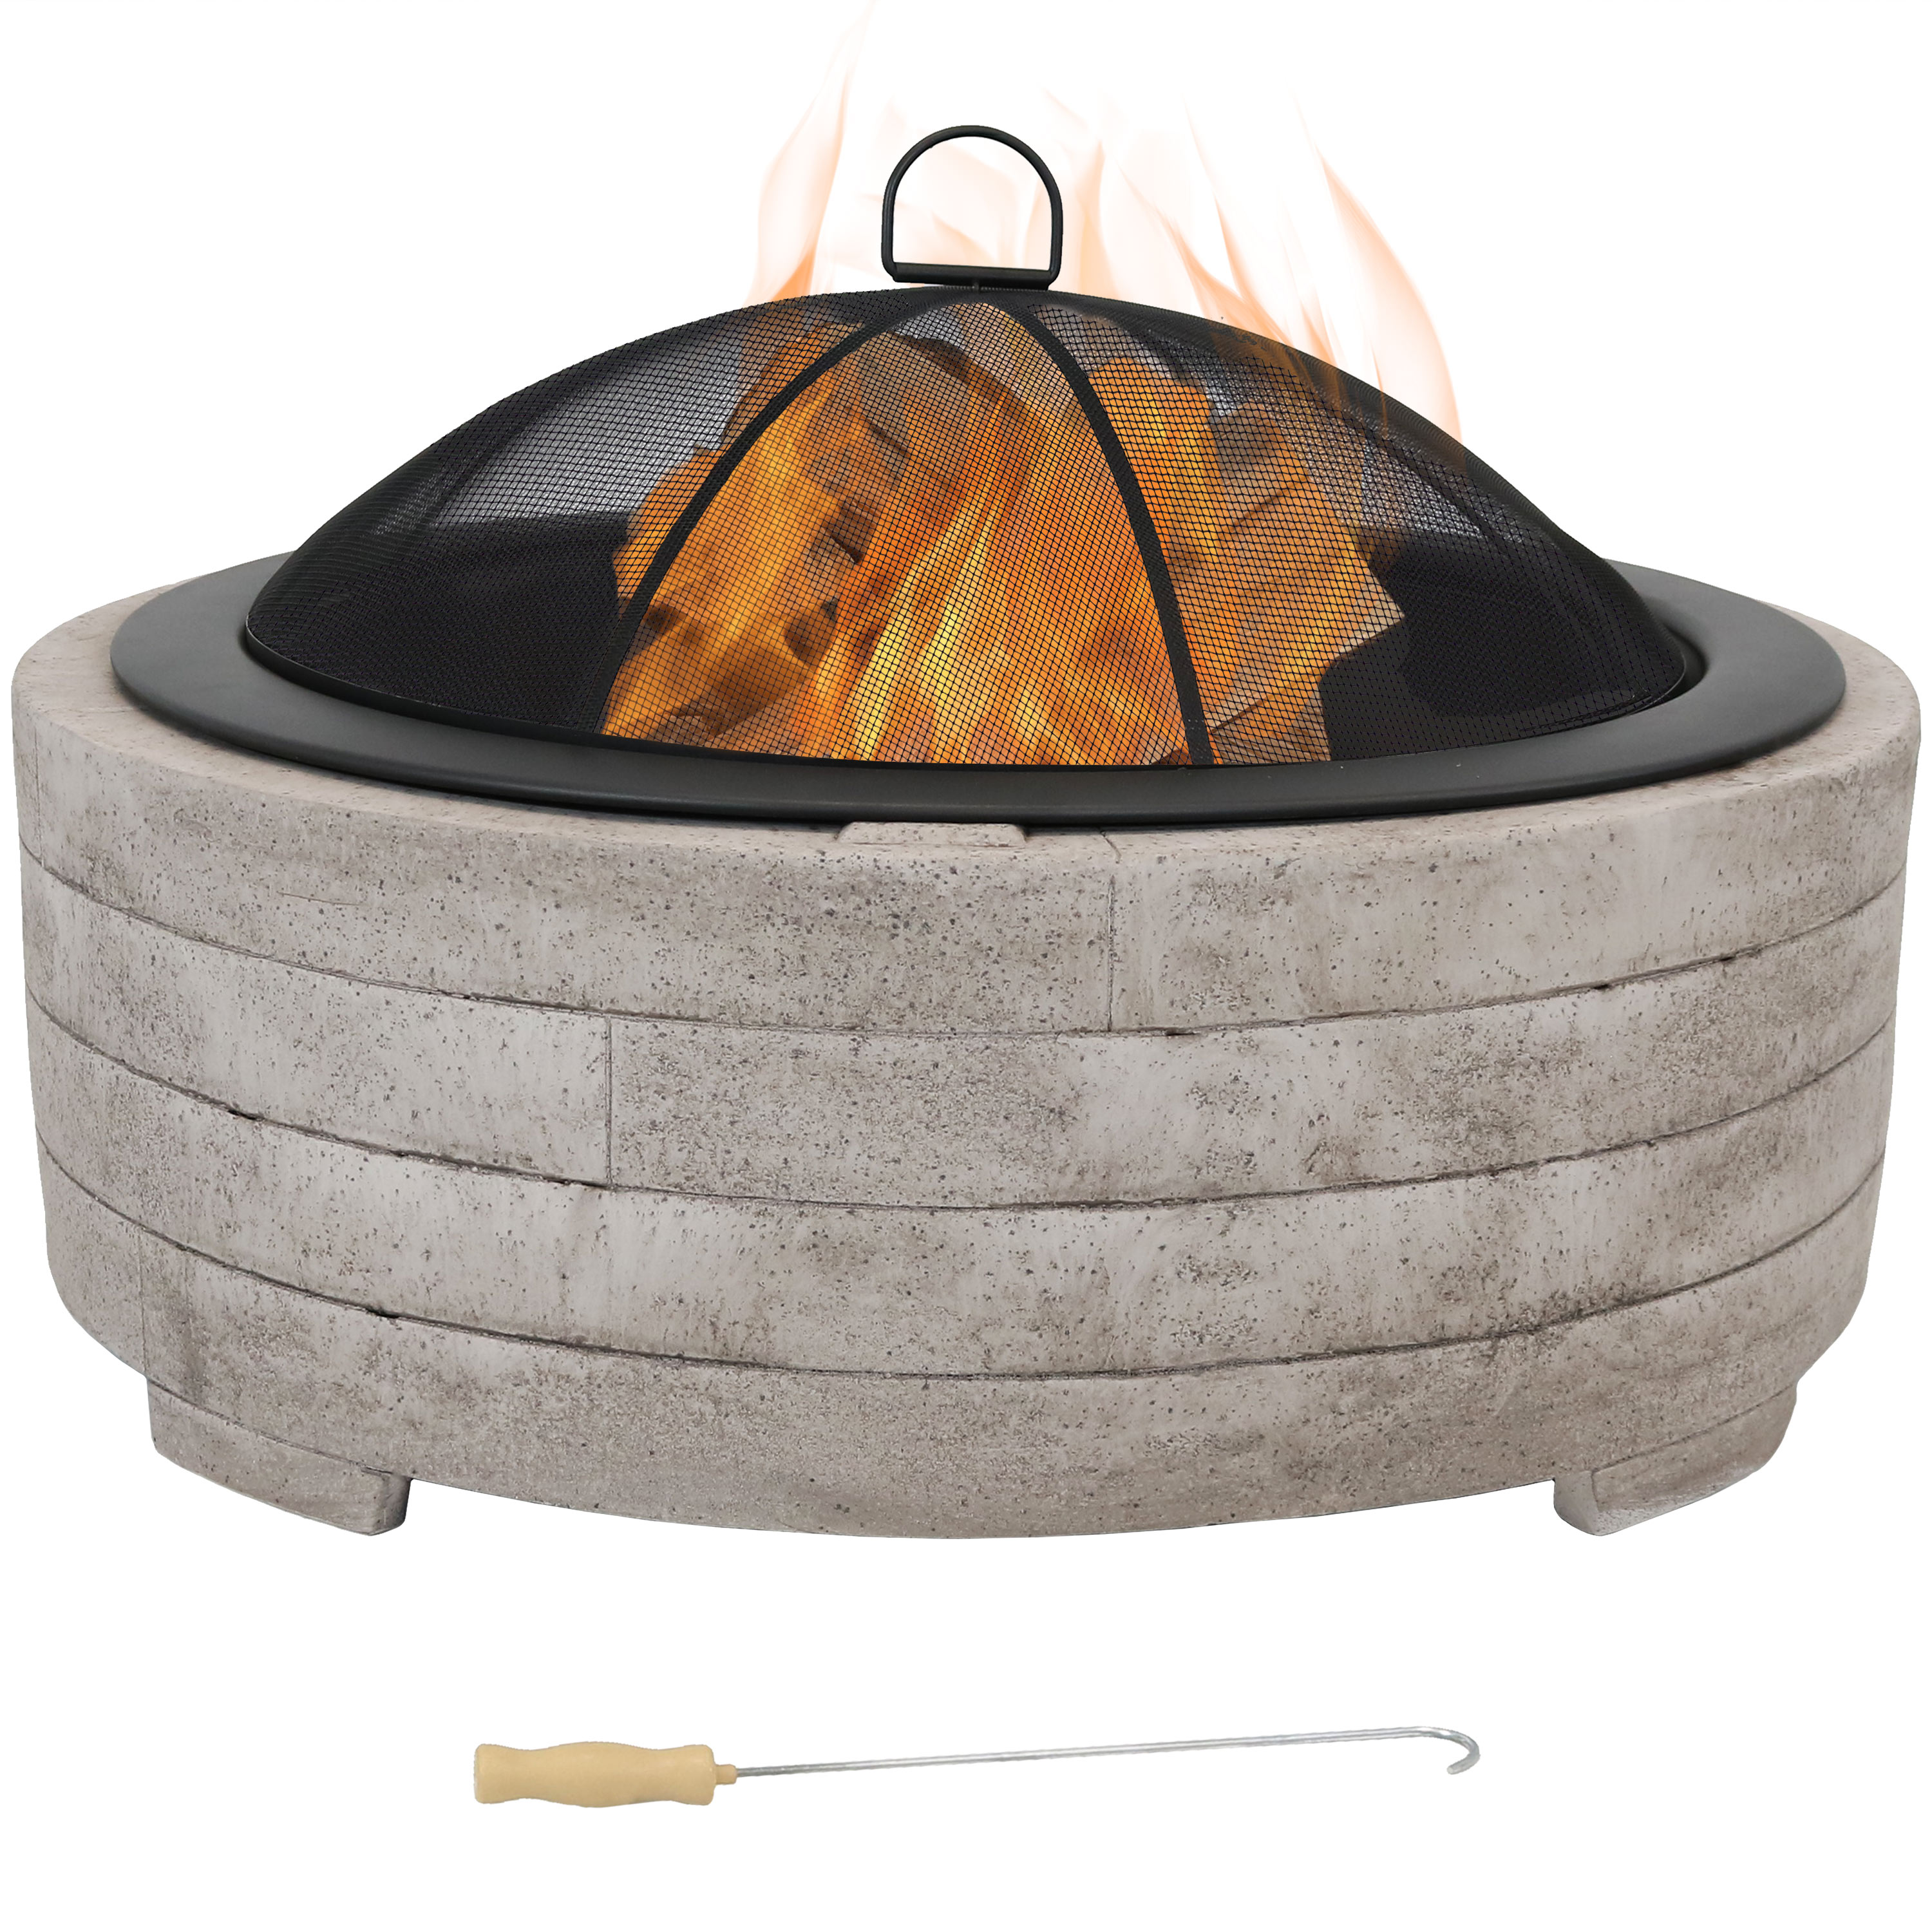 Sunnydaze Faux Stone Wood-Burning Fire Pit with Spark Screen - 35-Inch